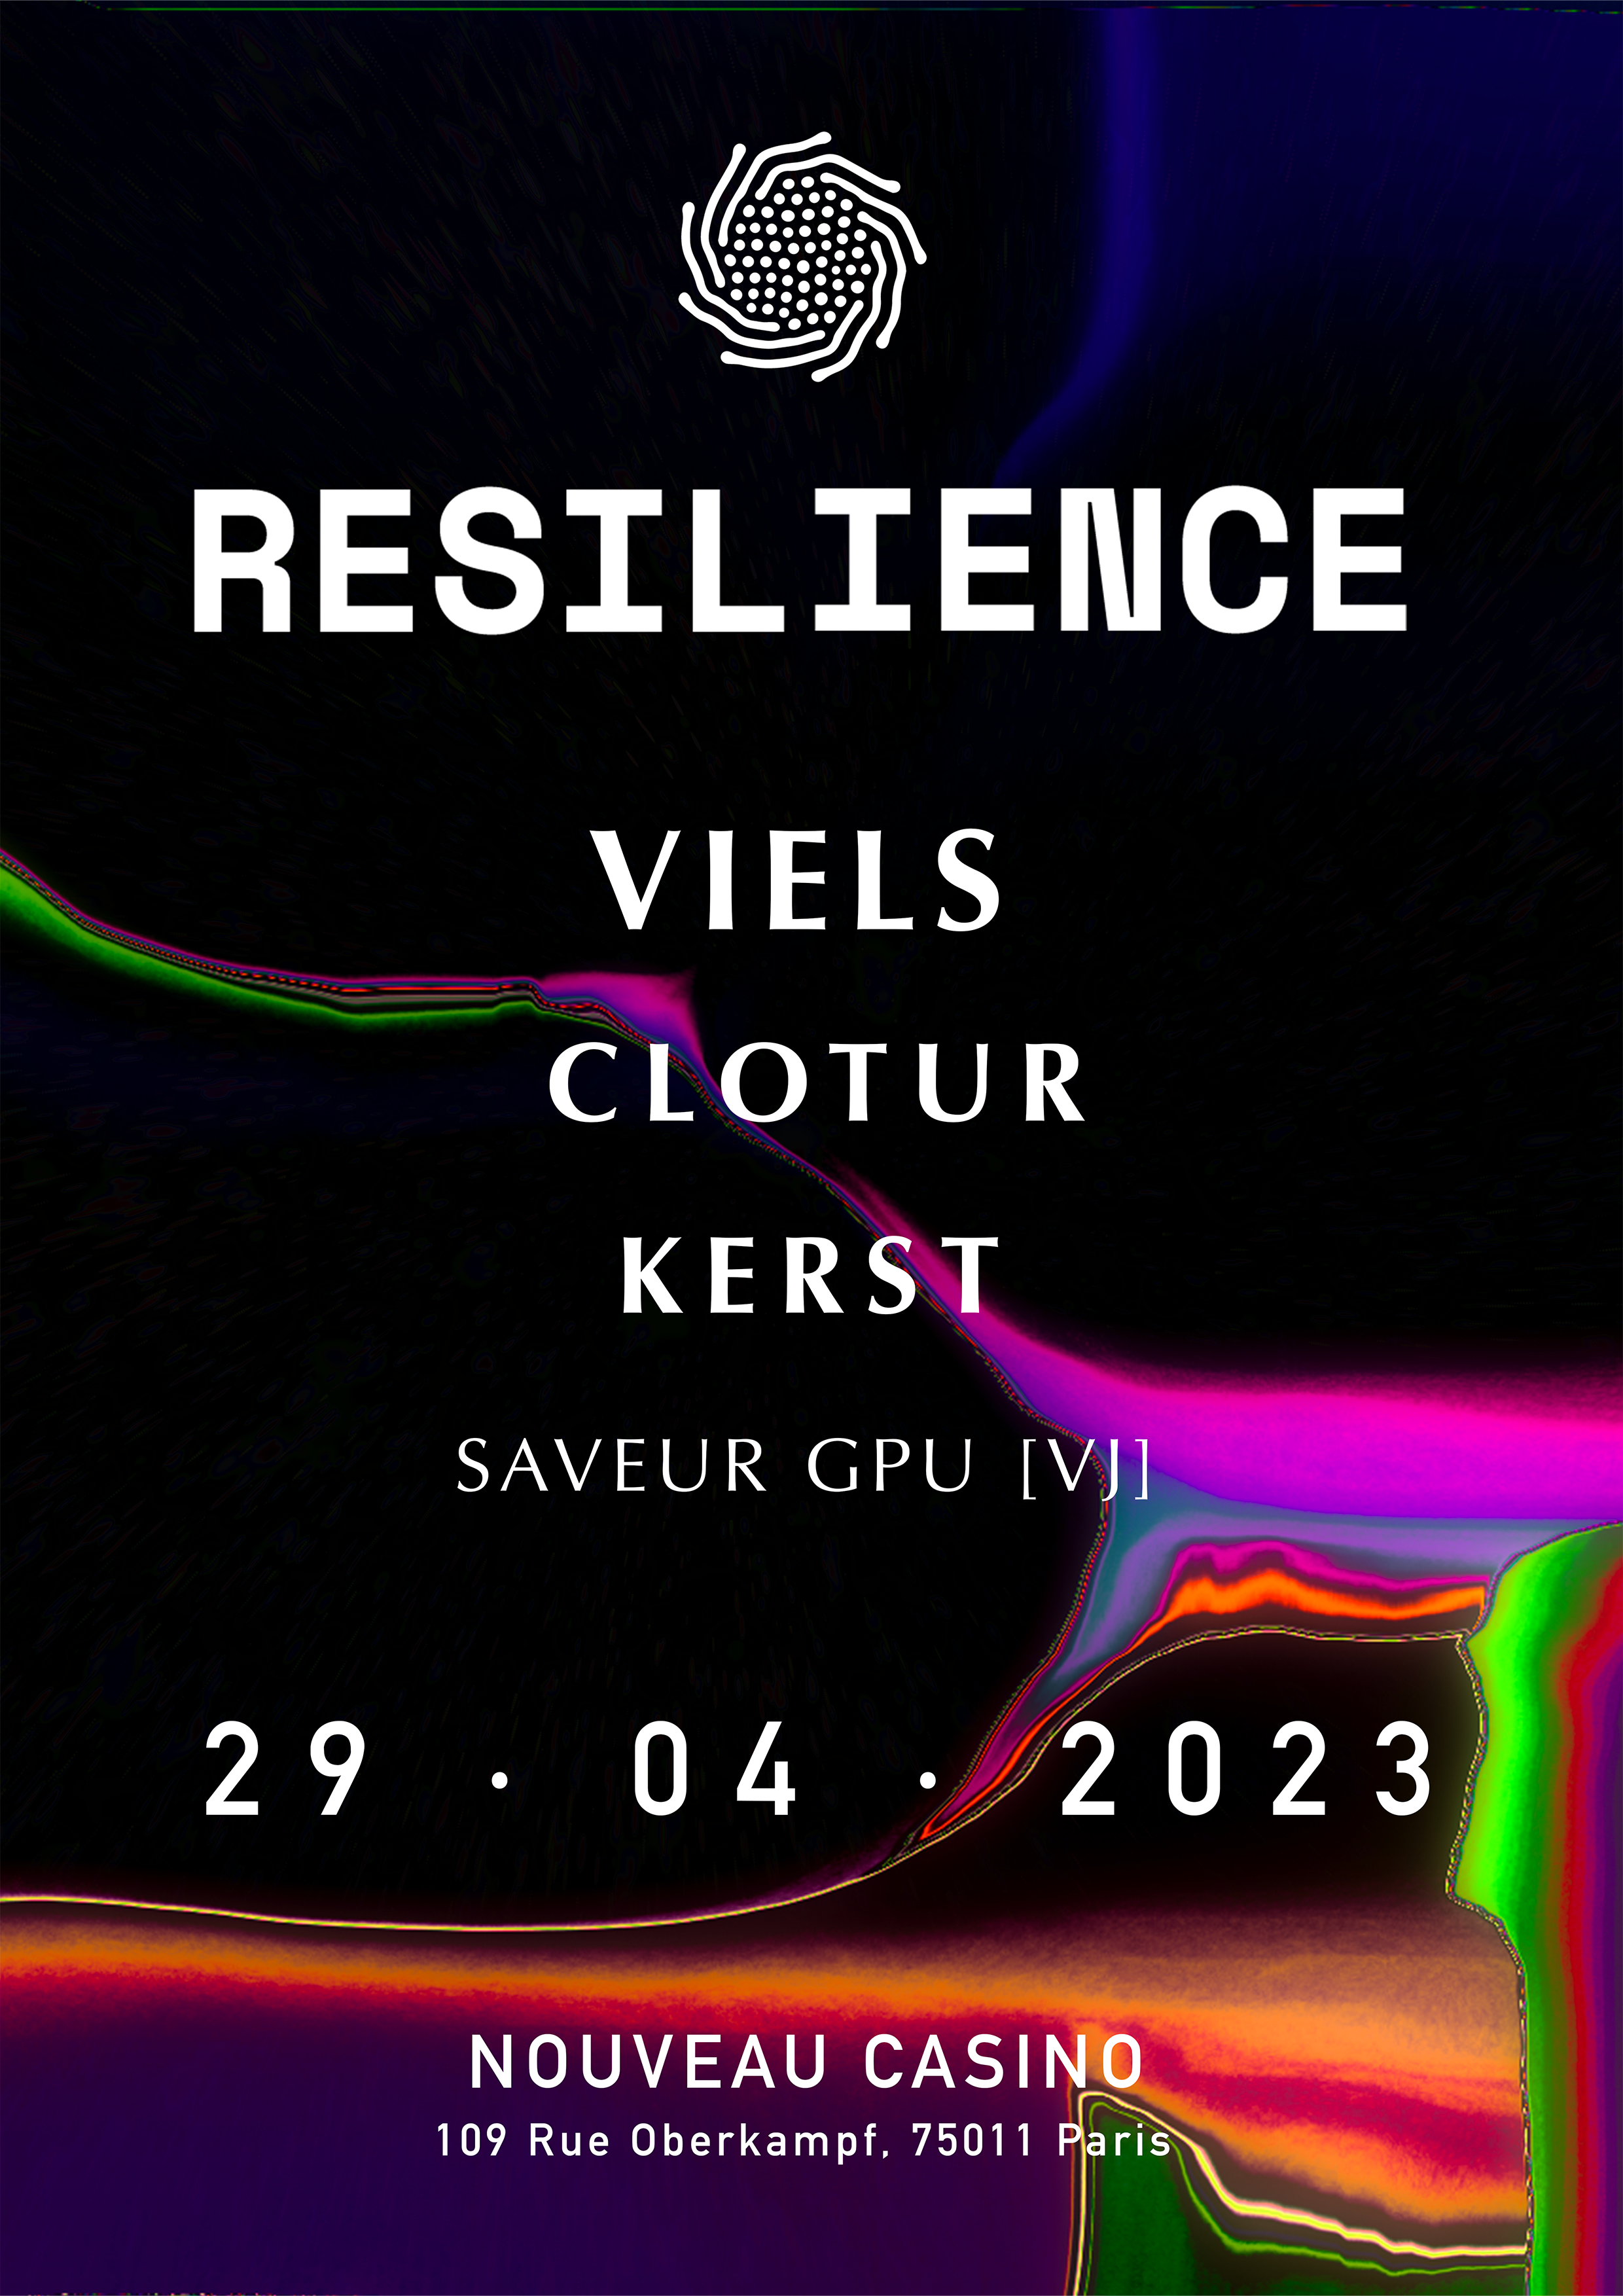 RESILIENCE: Viels, Clotur, Kerst - フライヤー裏